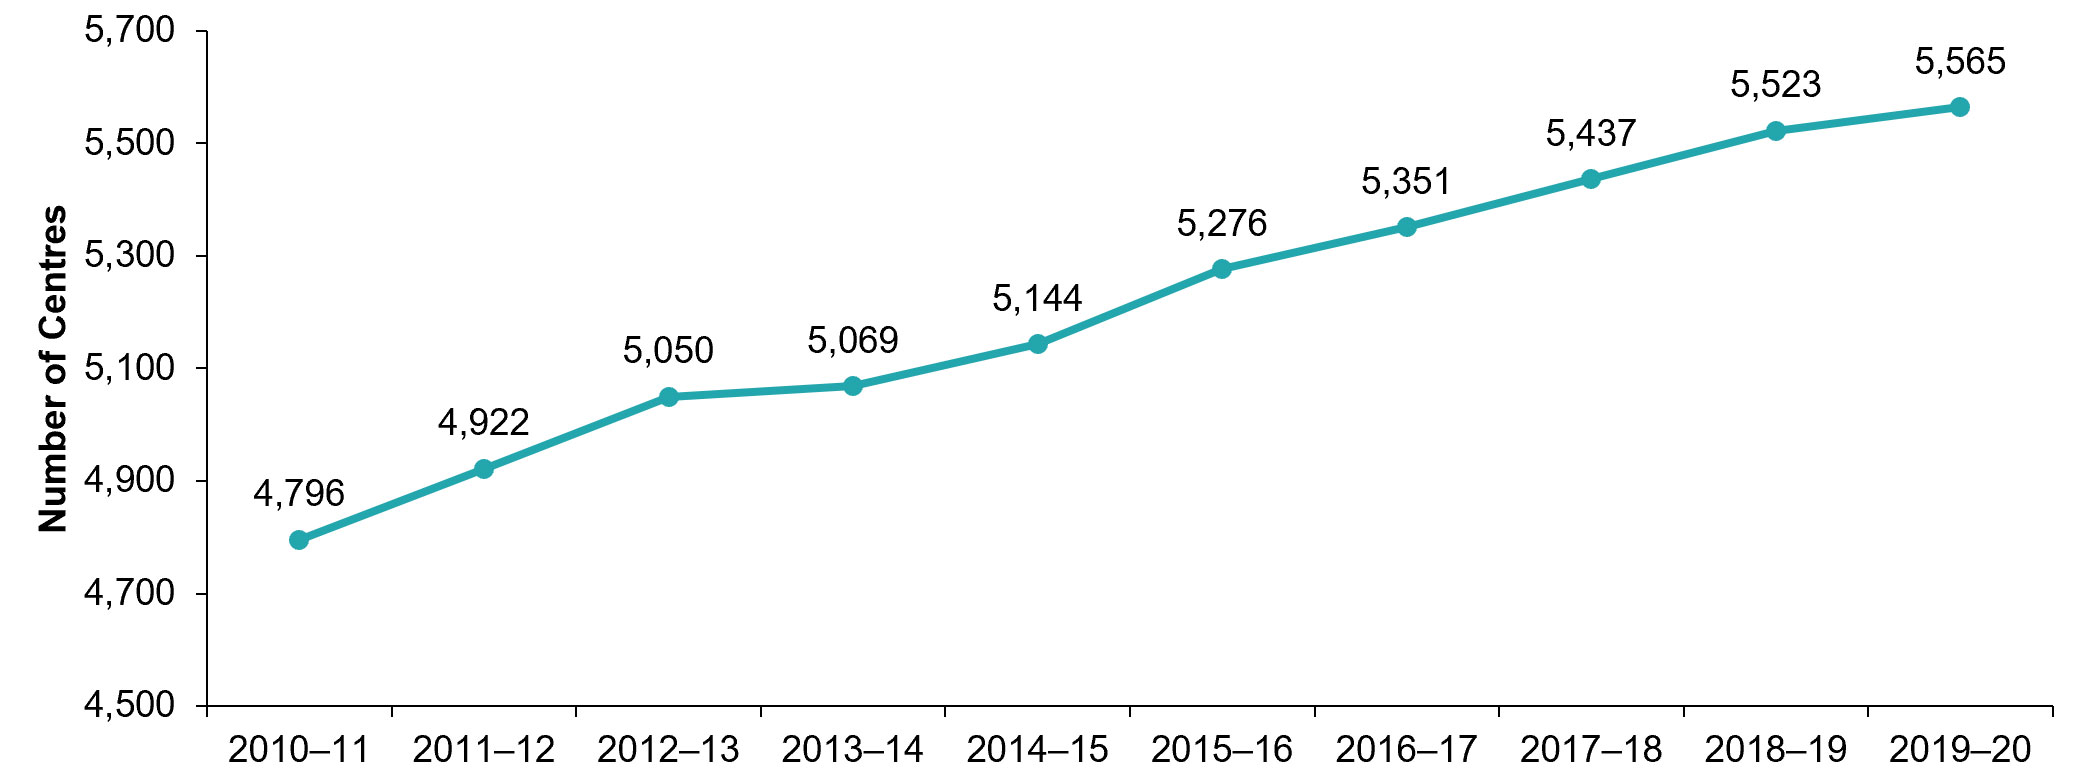 Number of Licensed Child Care Centres, 2010-11 to 2019-20